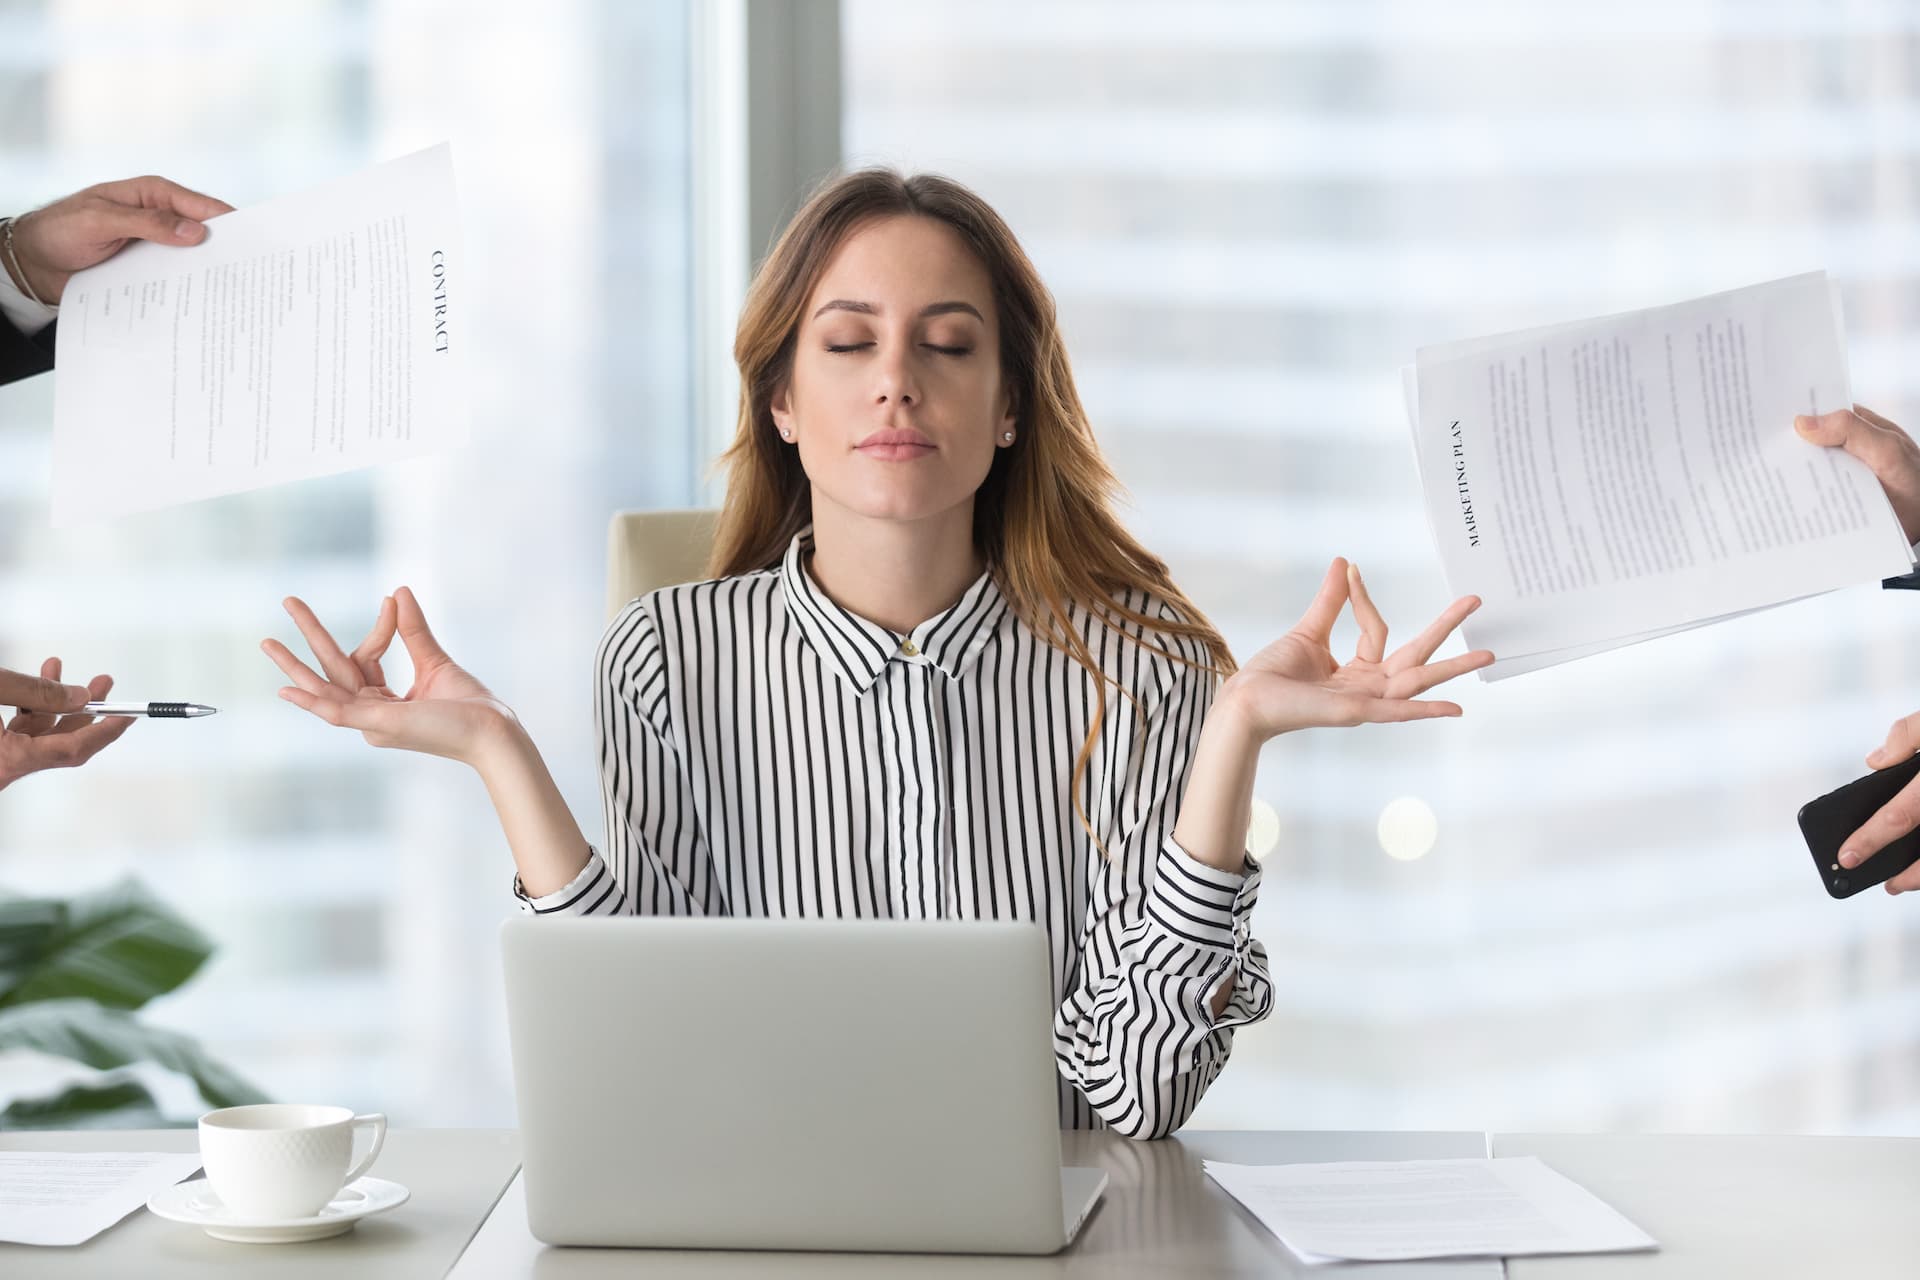 Calm female executive meditating in front of her laptop while coworkers push paperwork and assignments toward her.